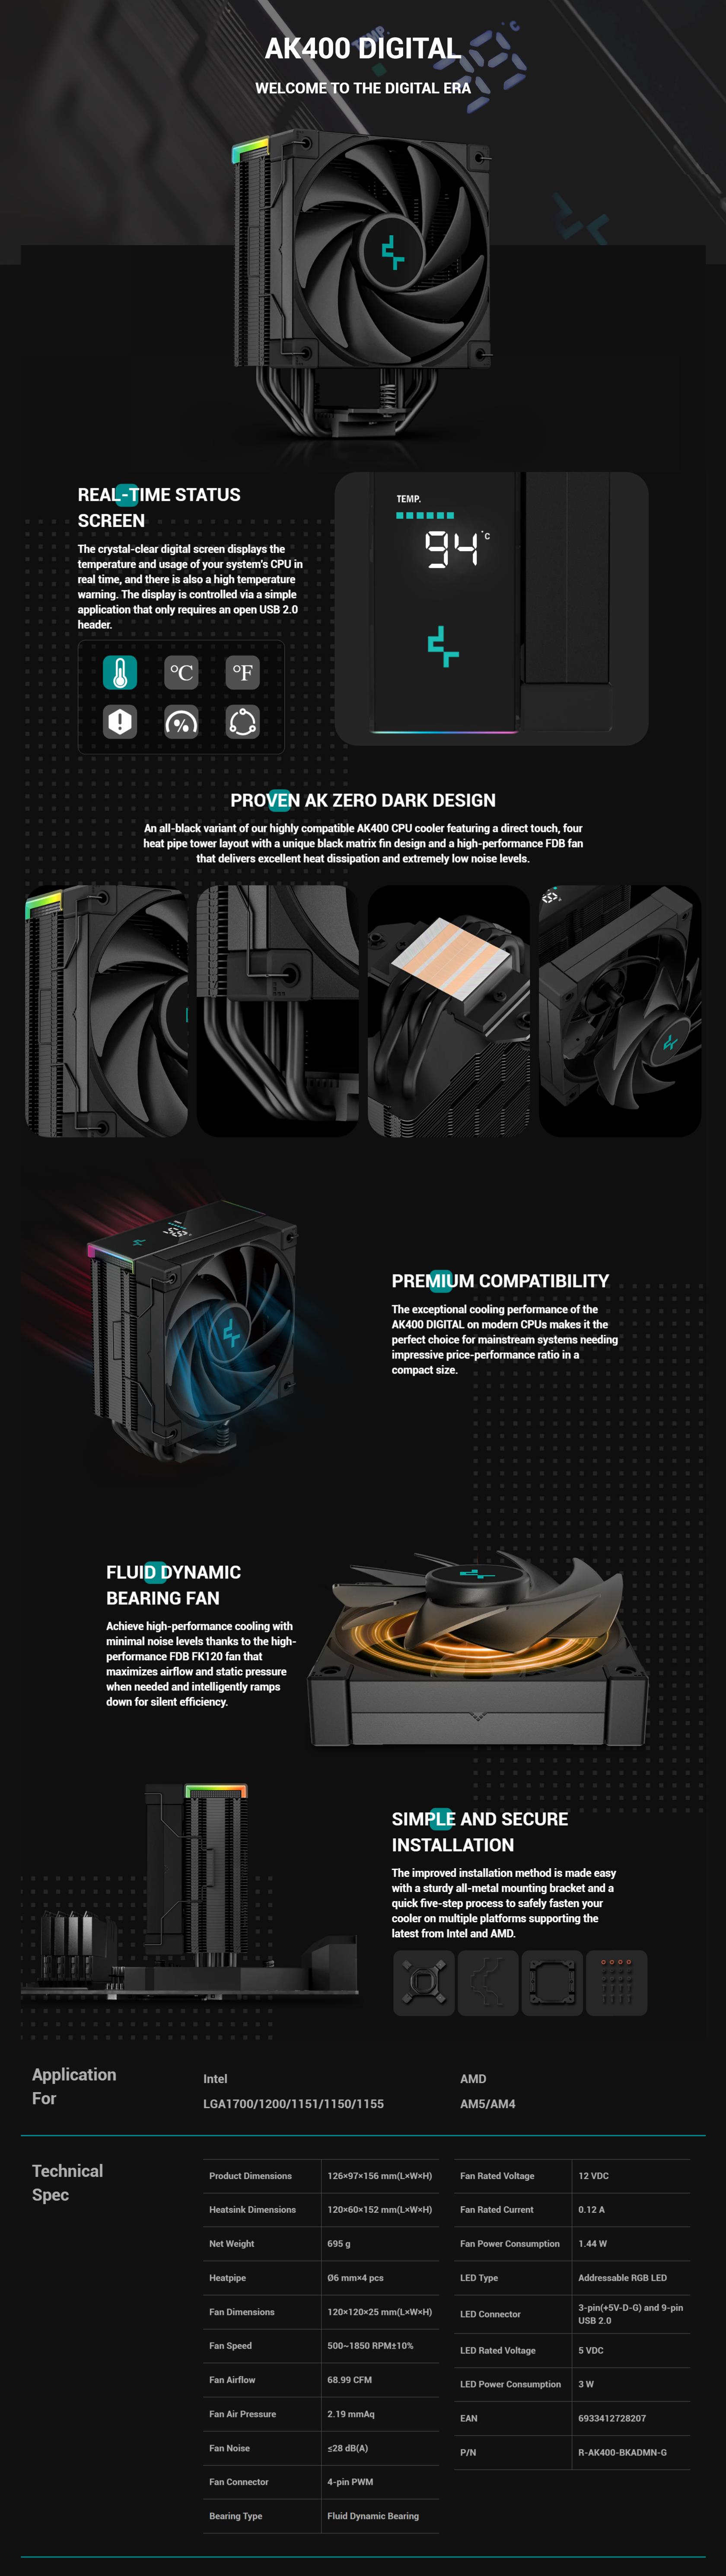 A large marketing image providing additional information about the product DeepCool AK400 Digital CPU Cooler - Black - Additional alt info not provided